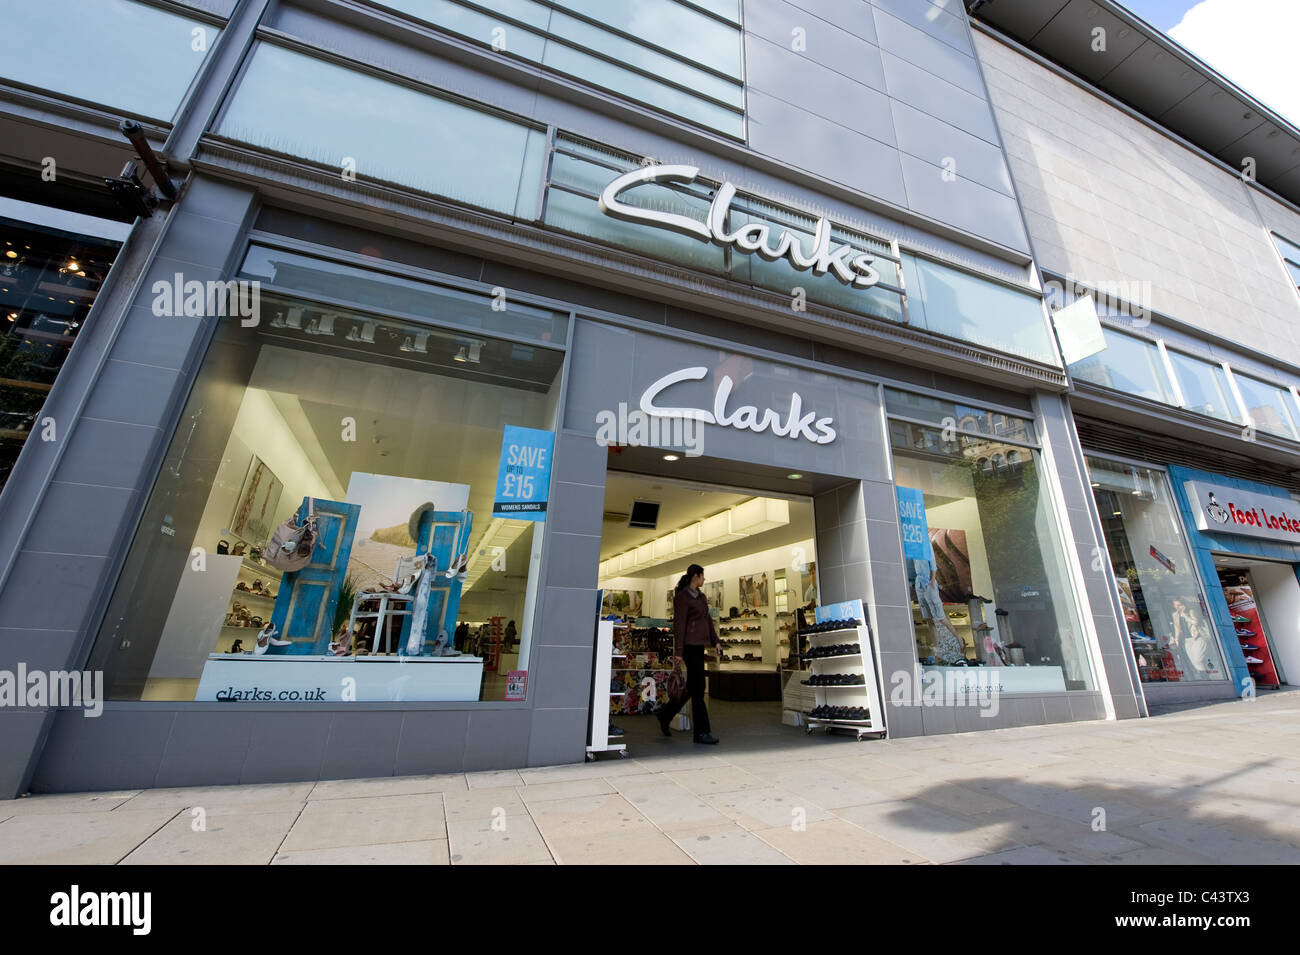 The storefront of the high street retailer Clarks on Market Street,  Manchester. (Editorial use only Stock Photo - Alamy